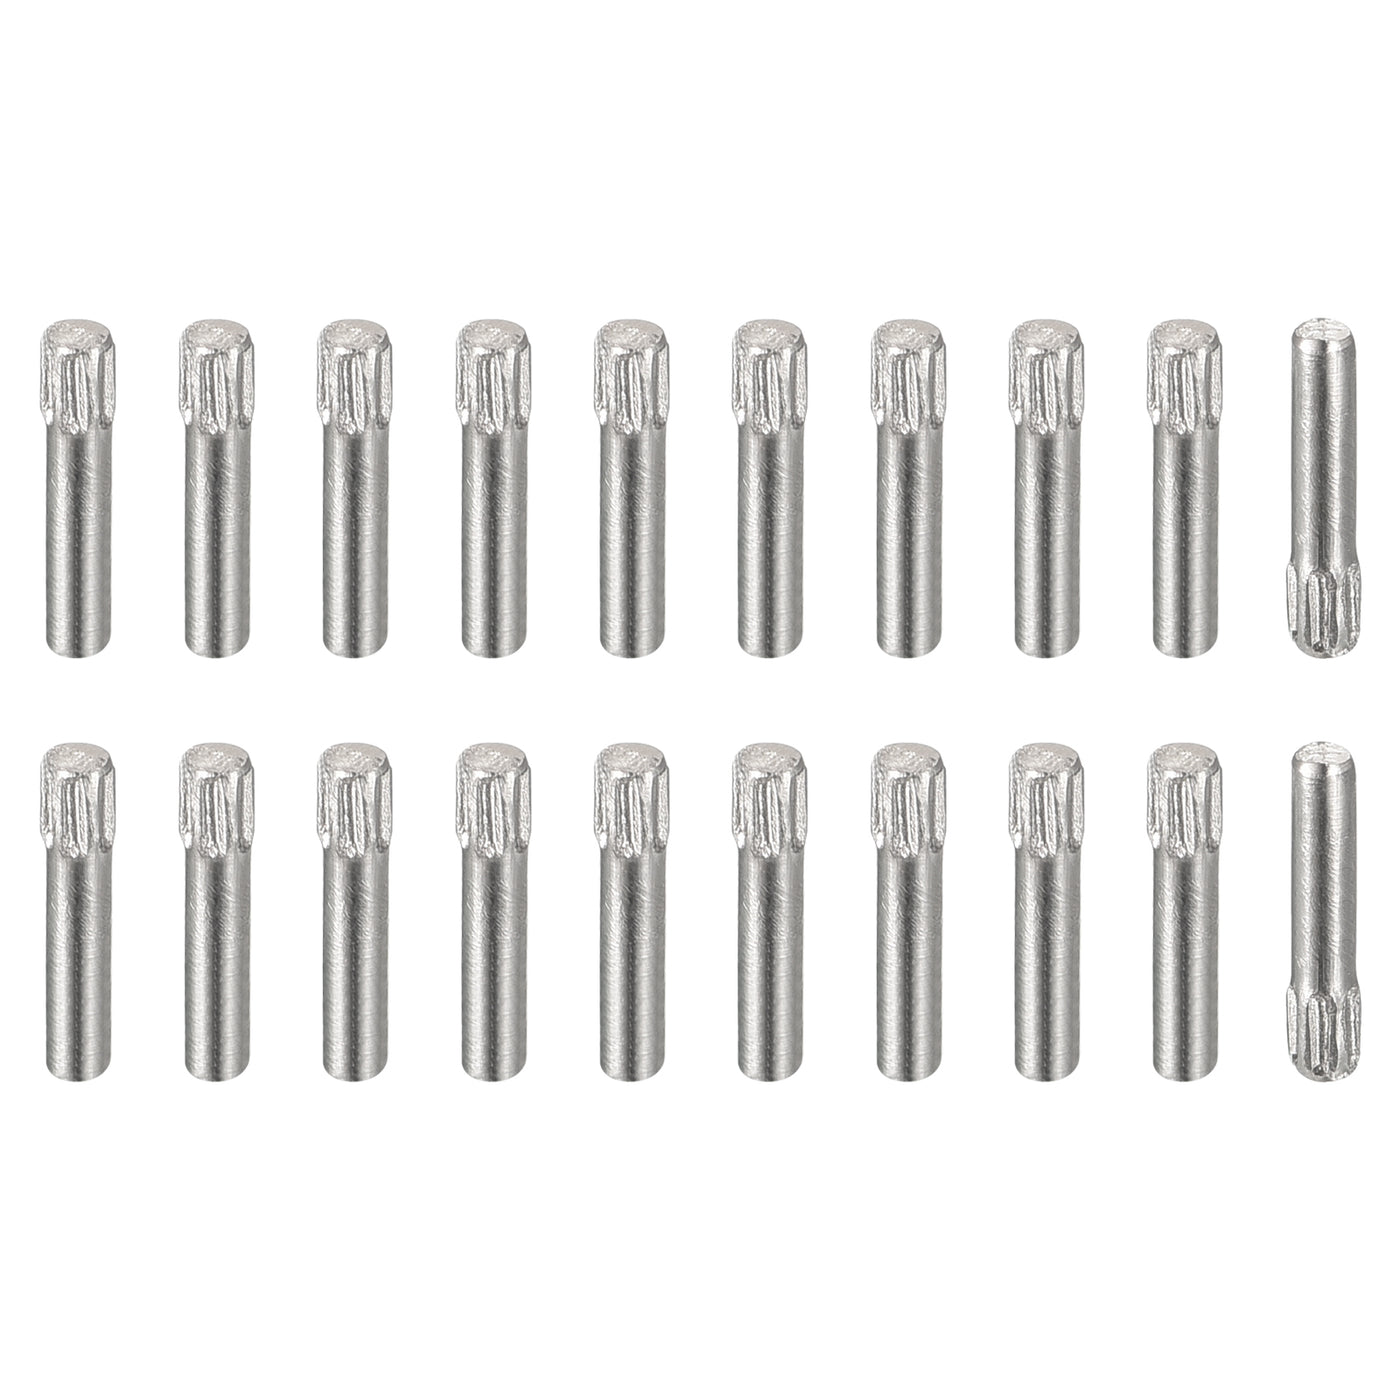 uxcell Uxcell 1.5x8mm 304 Stainless Steel Dowel Pins, 20Pcs Knurled Head Flat End Dowel Pin